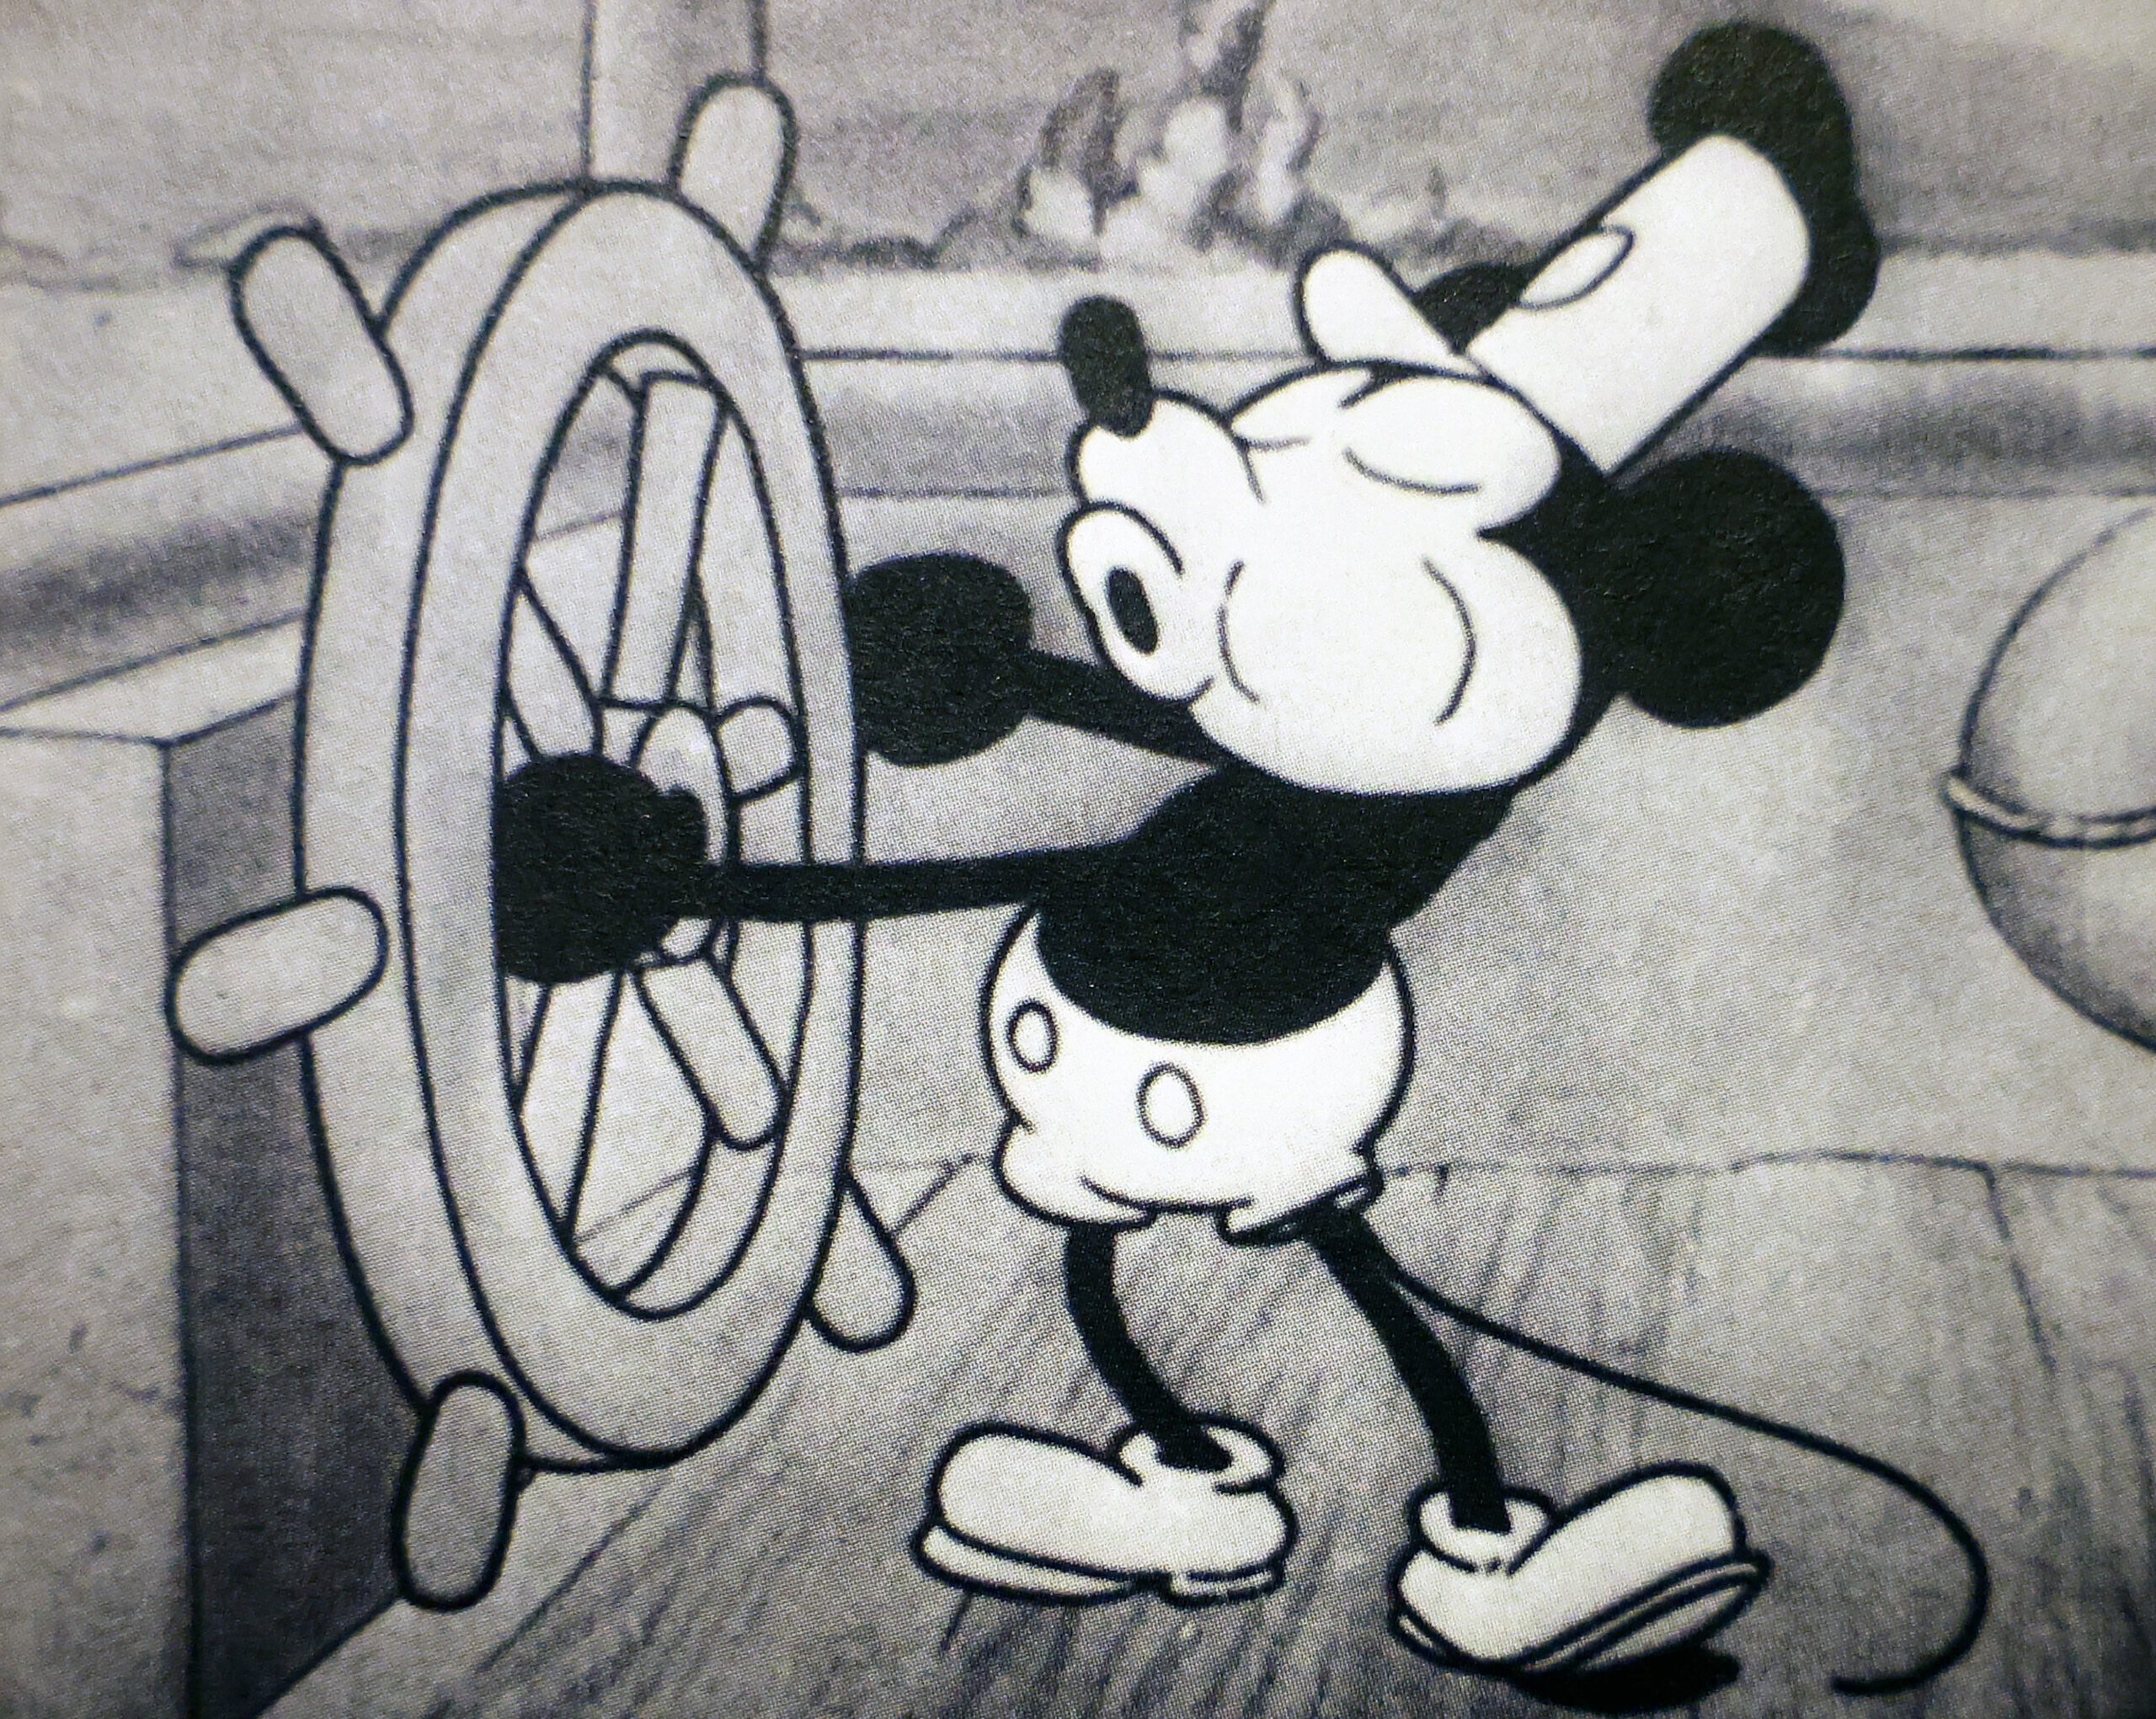 Still of the black-and-white 'Steamboat Willie' cartoon.